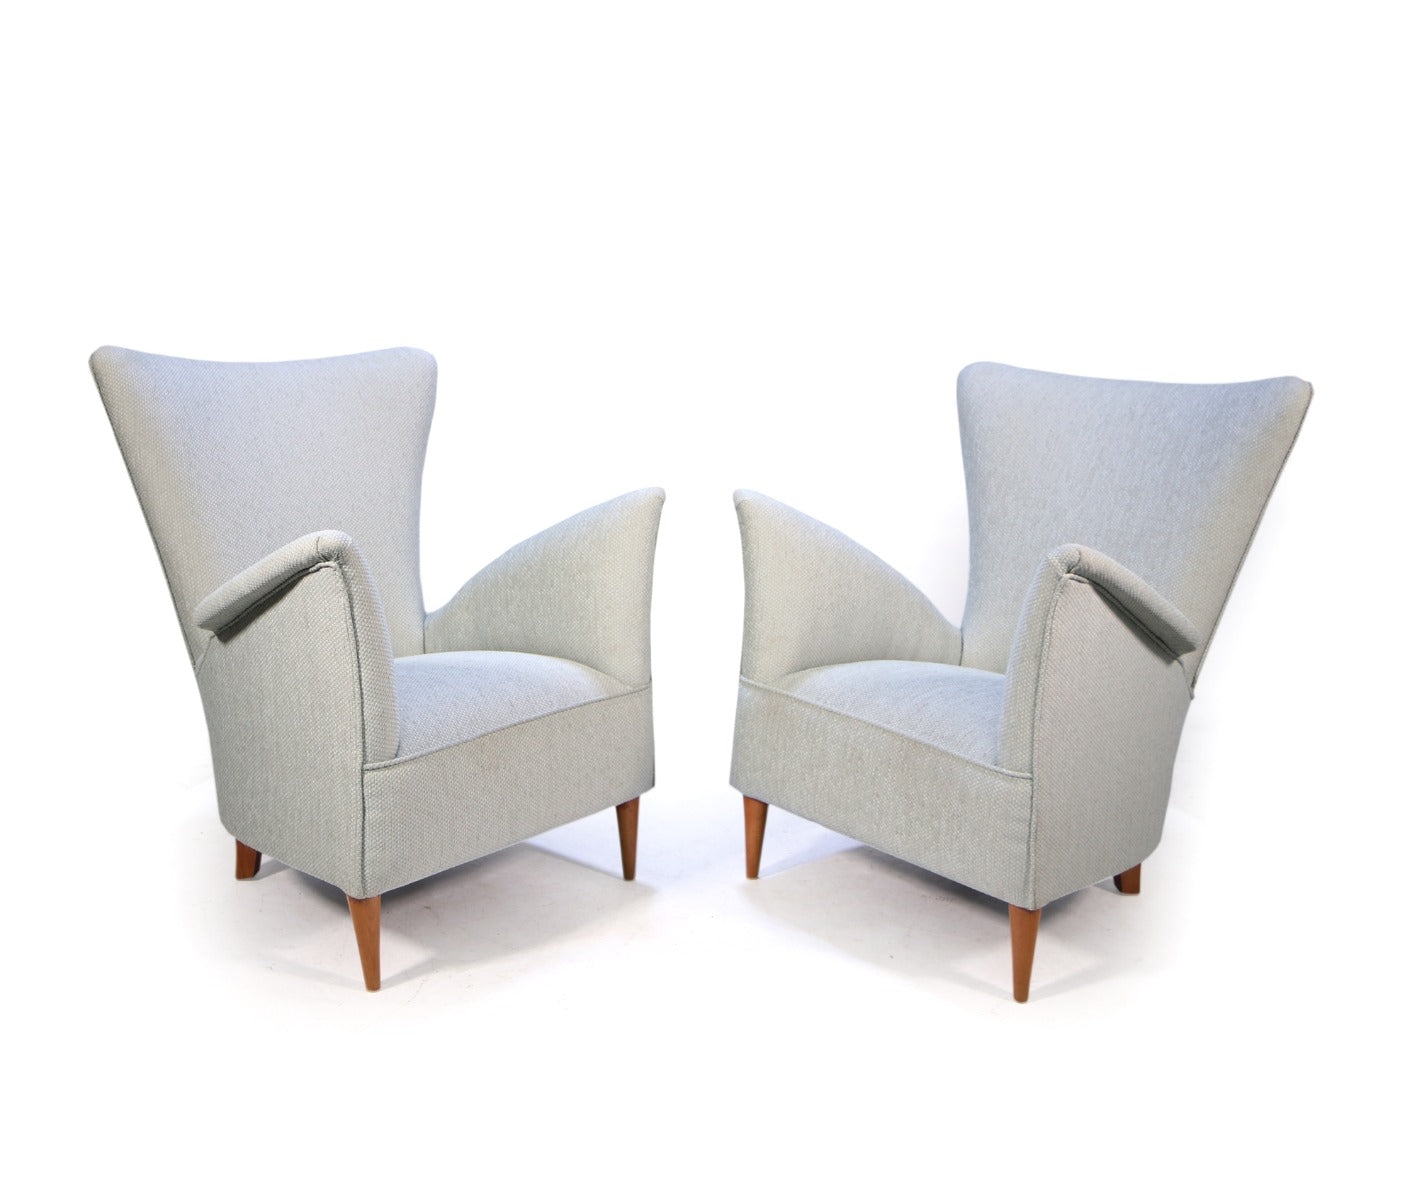 Pair of Armchairs By Gio Ponti – The Furniture Rooms